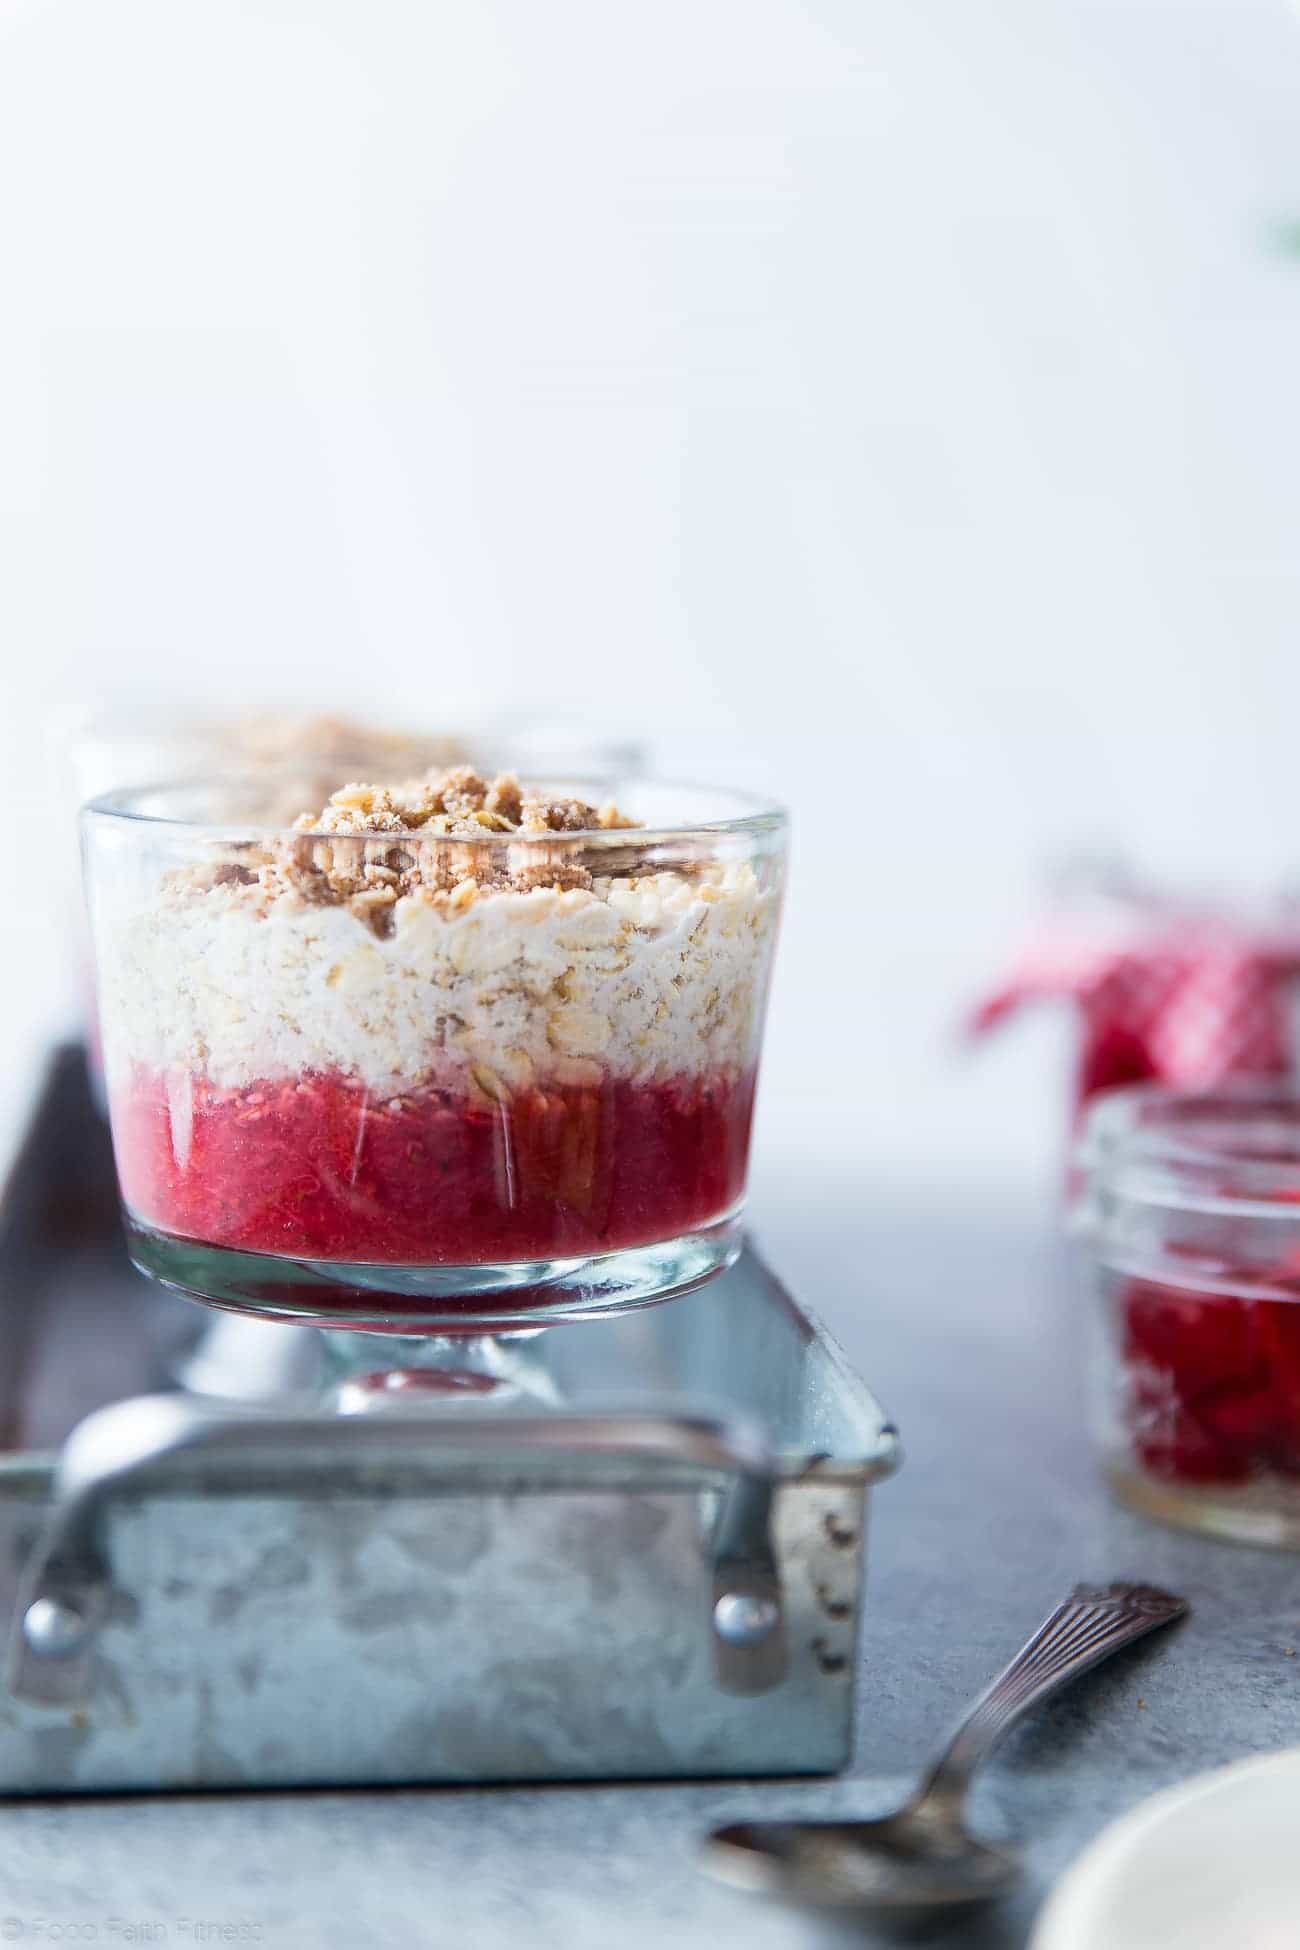 Strawberry Rhubarb Vegan Overnight Oats - These easy, dairy free overnight oats taste like waking up to a healthy slice of pie for breakfast! Make-ahead friendly and only 200 calories! | Foodfaithfitness.com | @FoodFaithFit